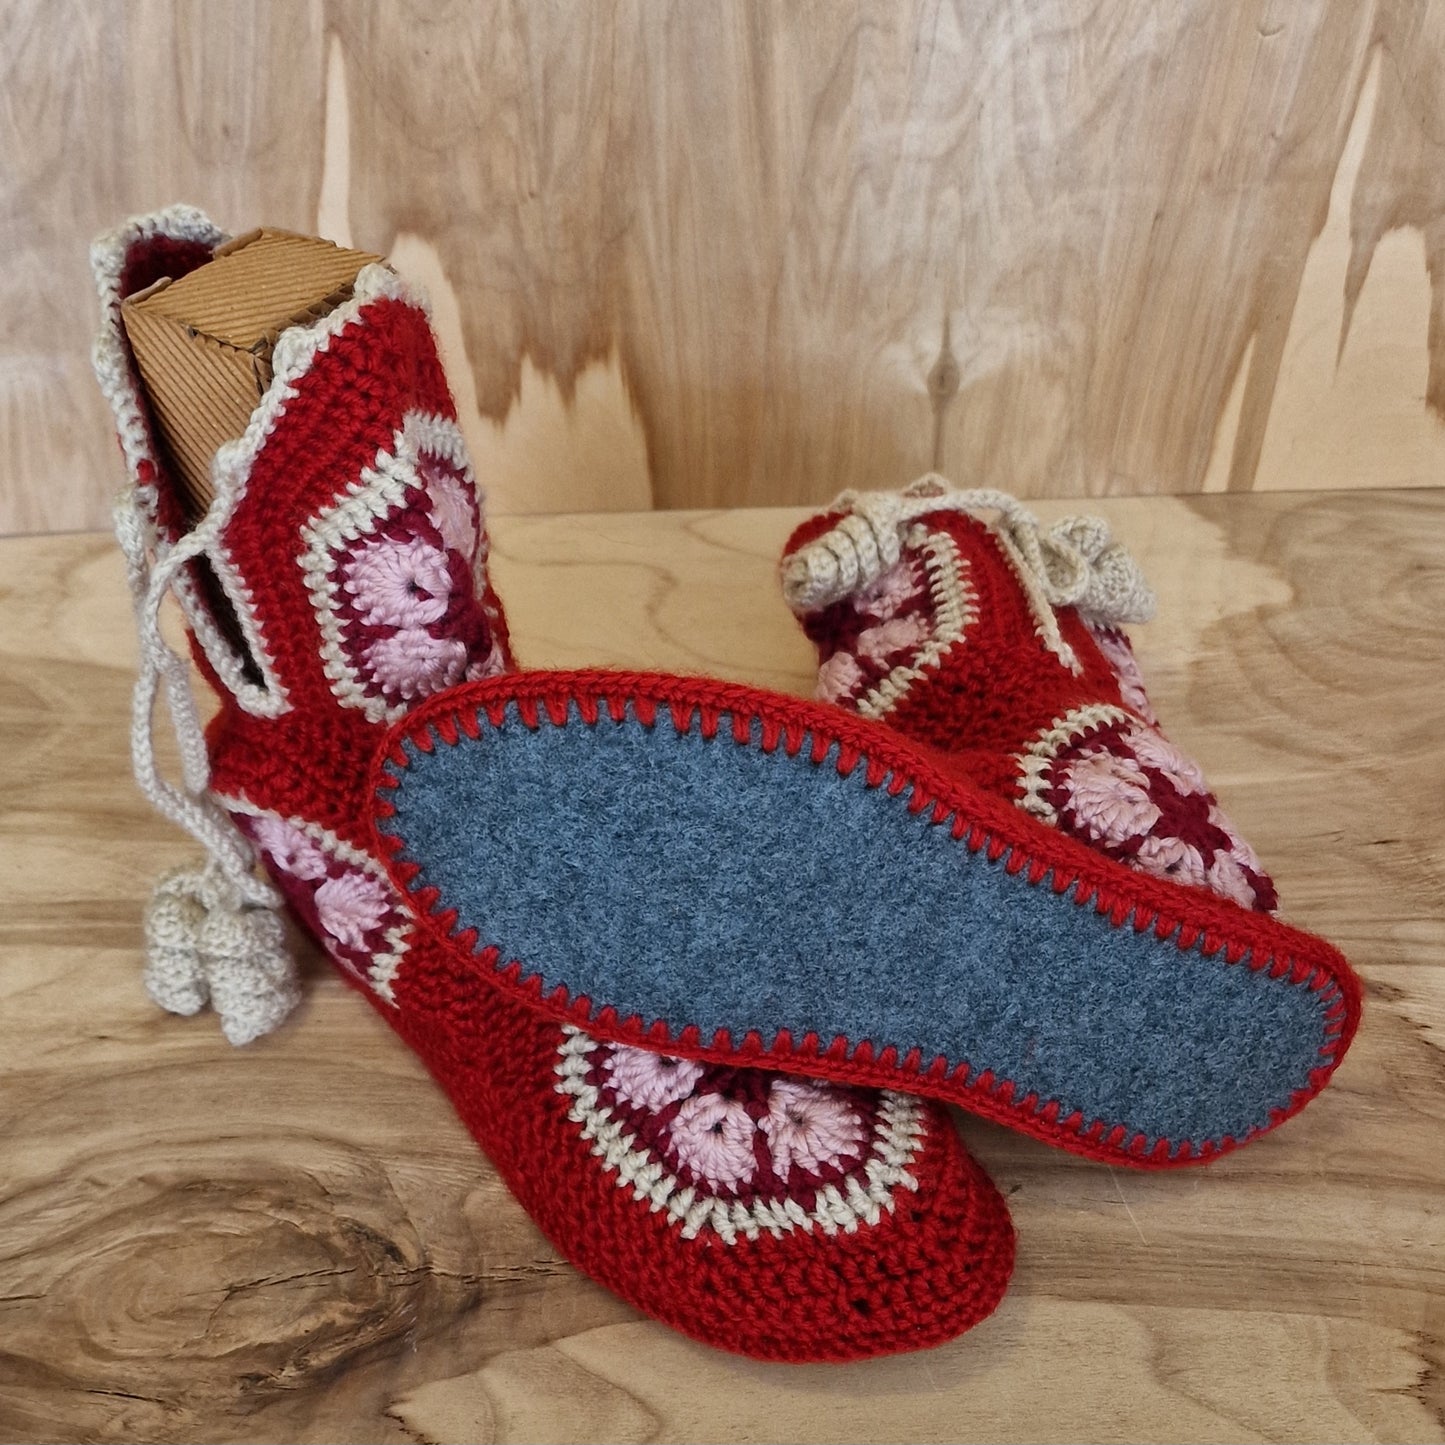 Hand crocheted booties/slippers size 39-40. in red-pink shades (ME 3)